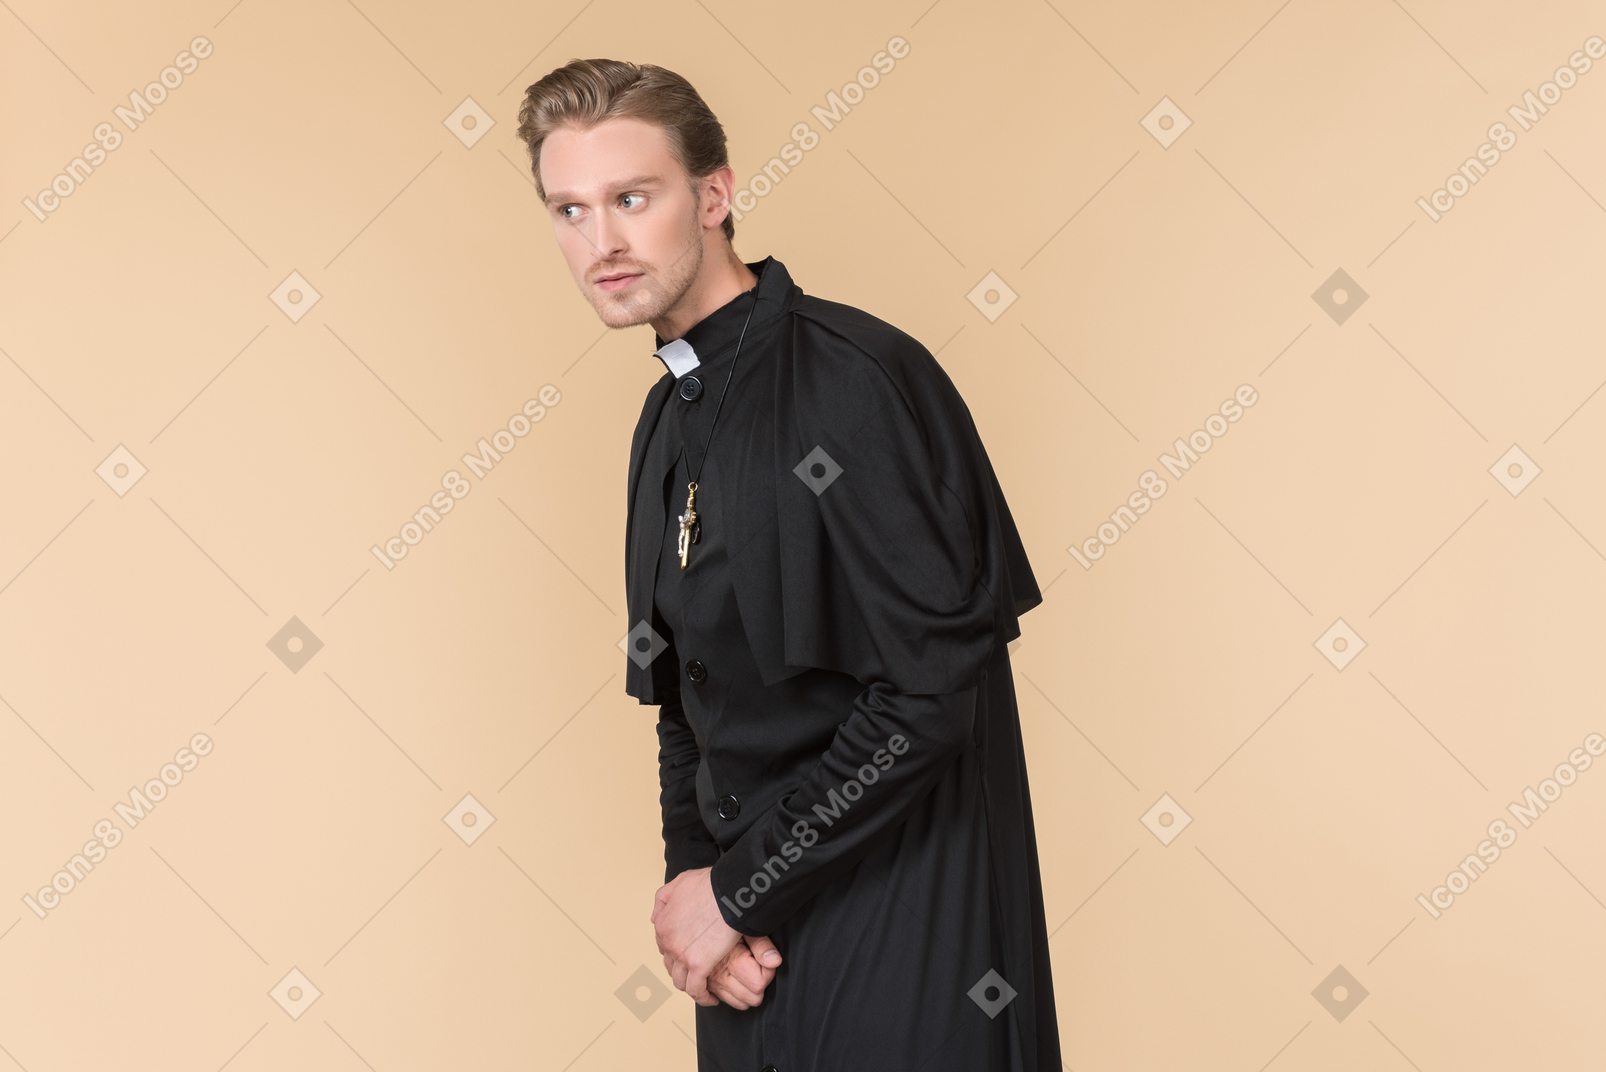 Catholic priest in cassock listening closely to something